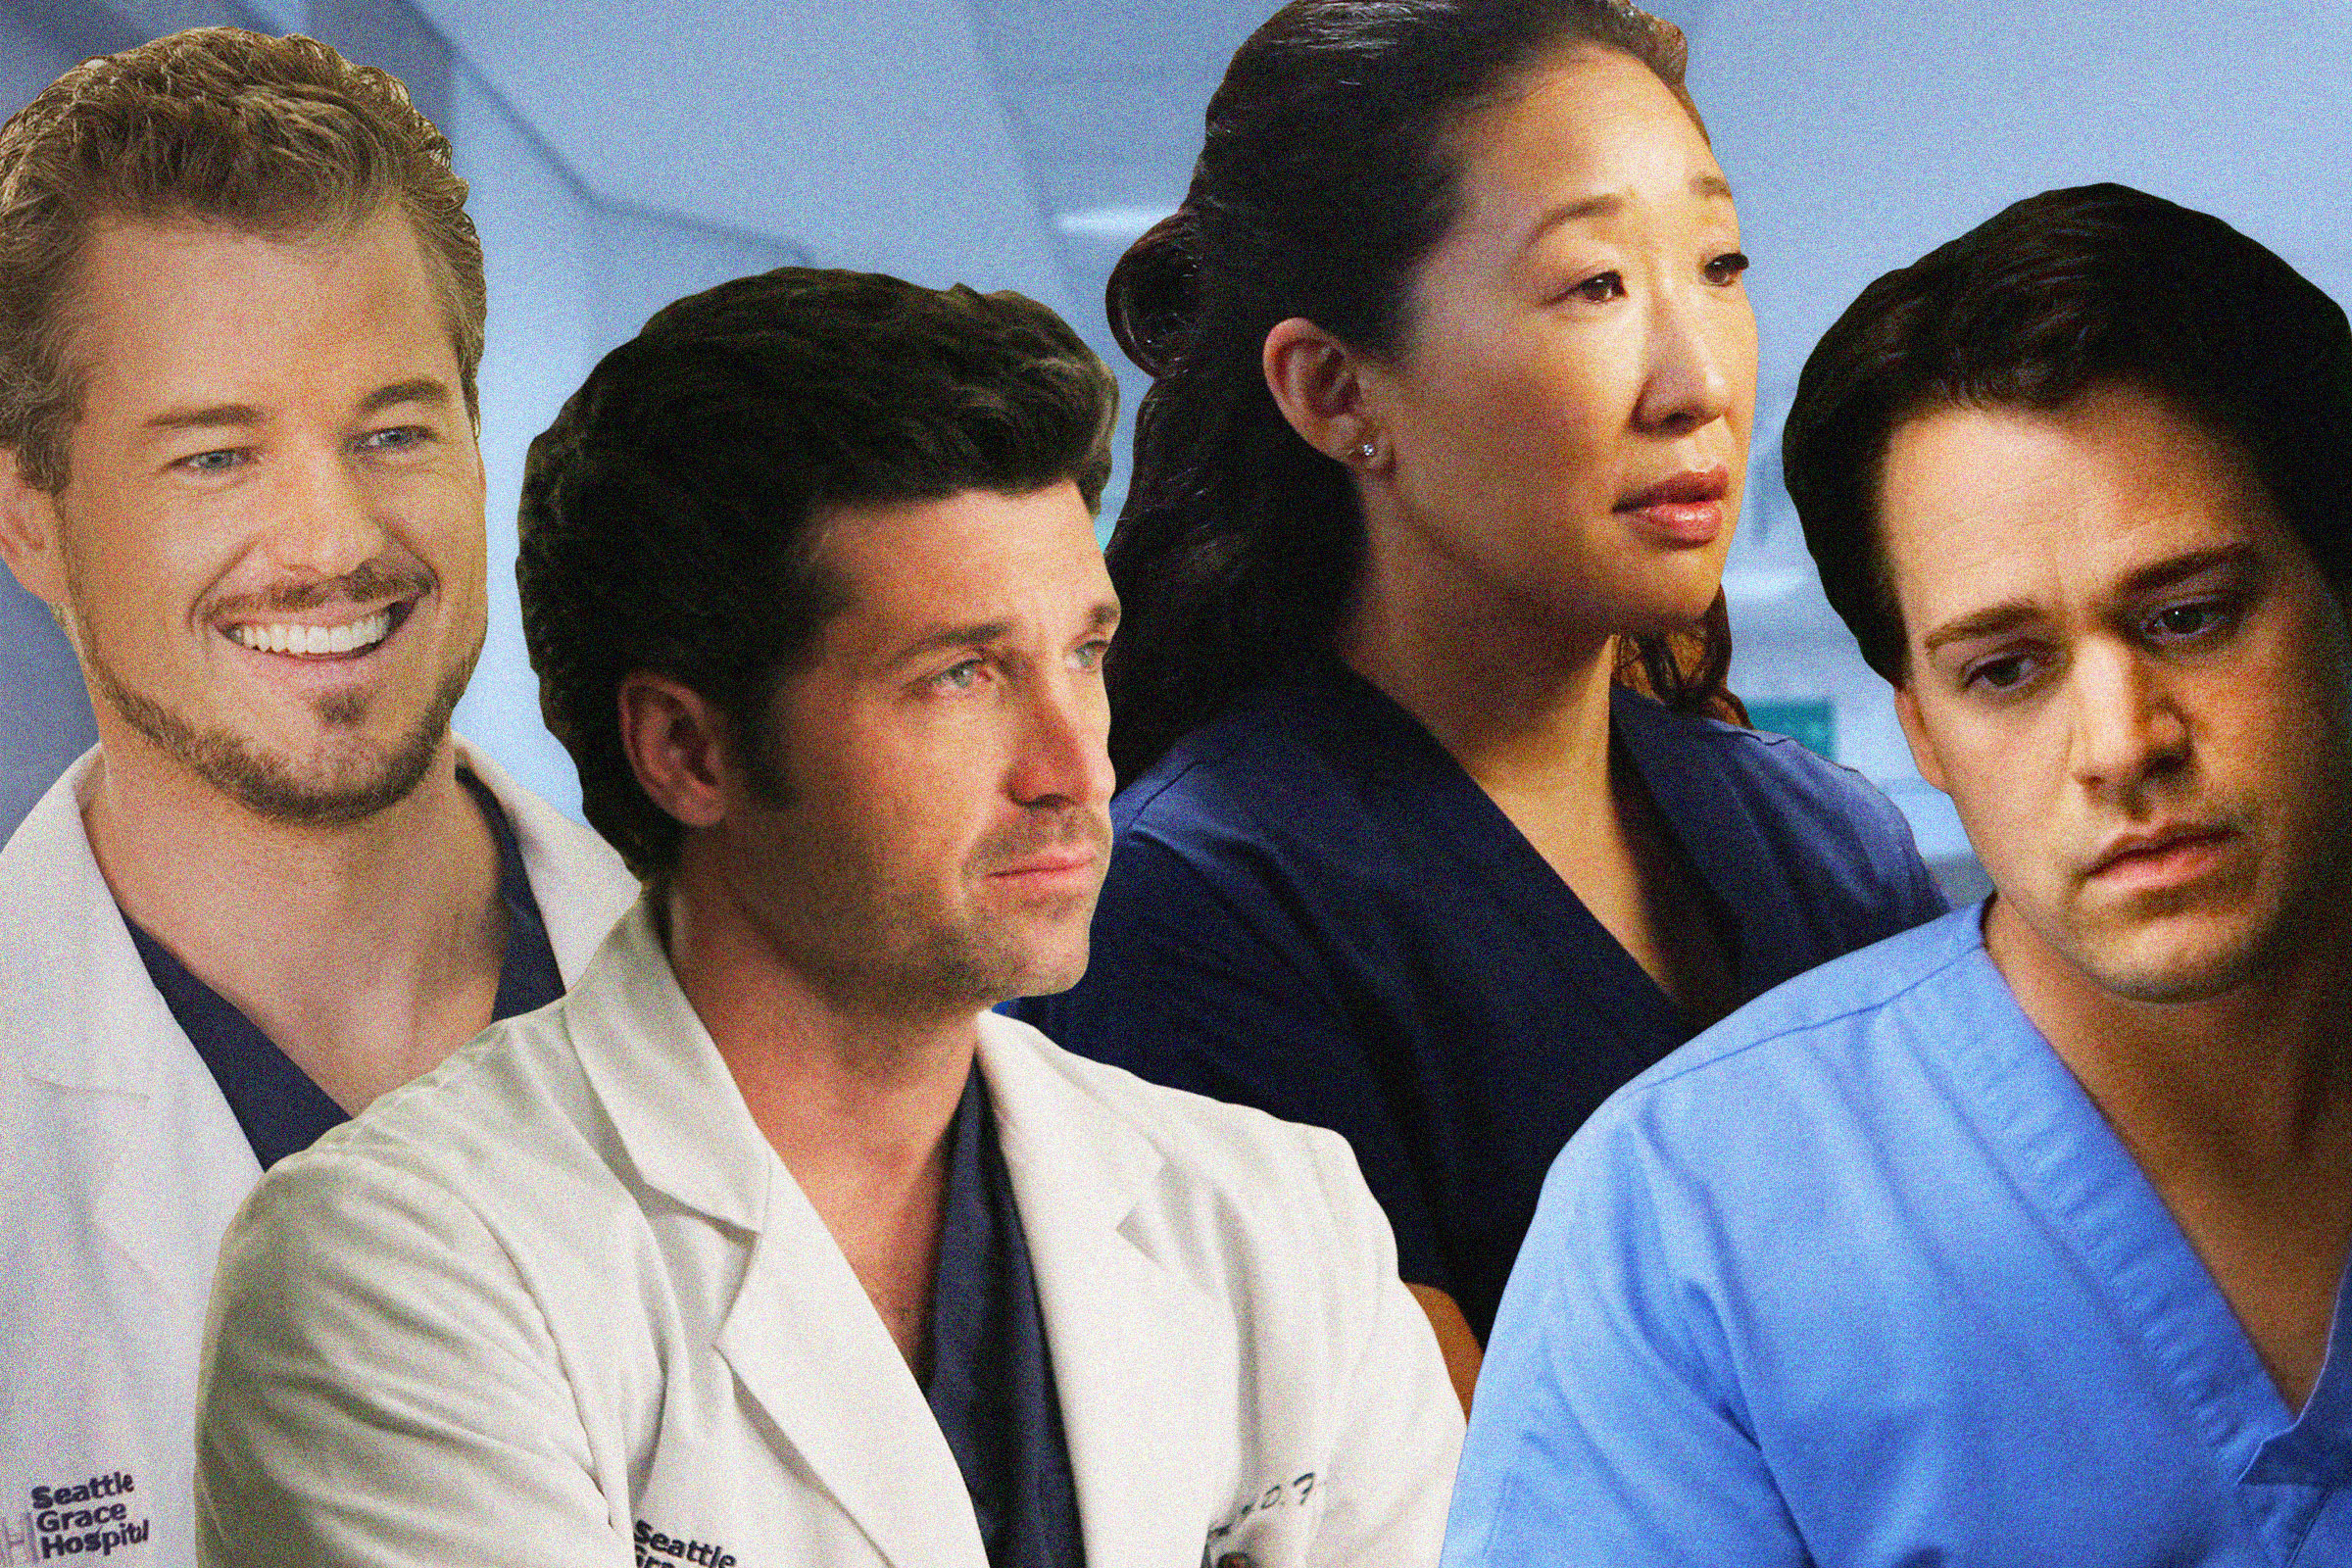 A collage of 4 characters from the show grey's anatomy on a background of inside a hospital